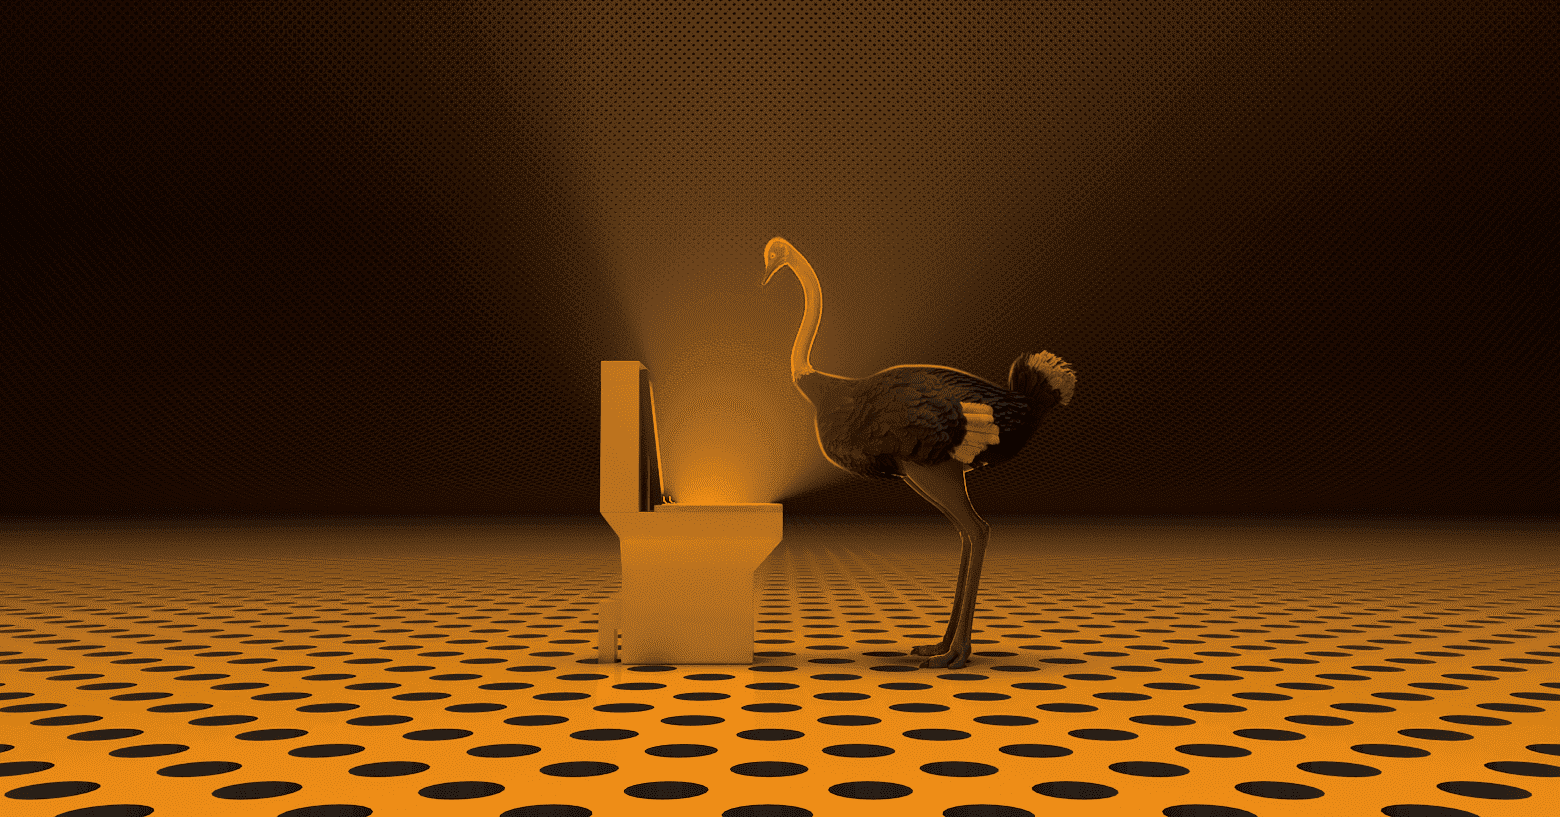 Ostrich Politic by Mohammad HouHou